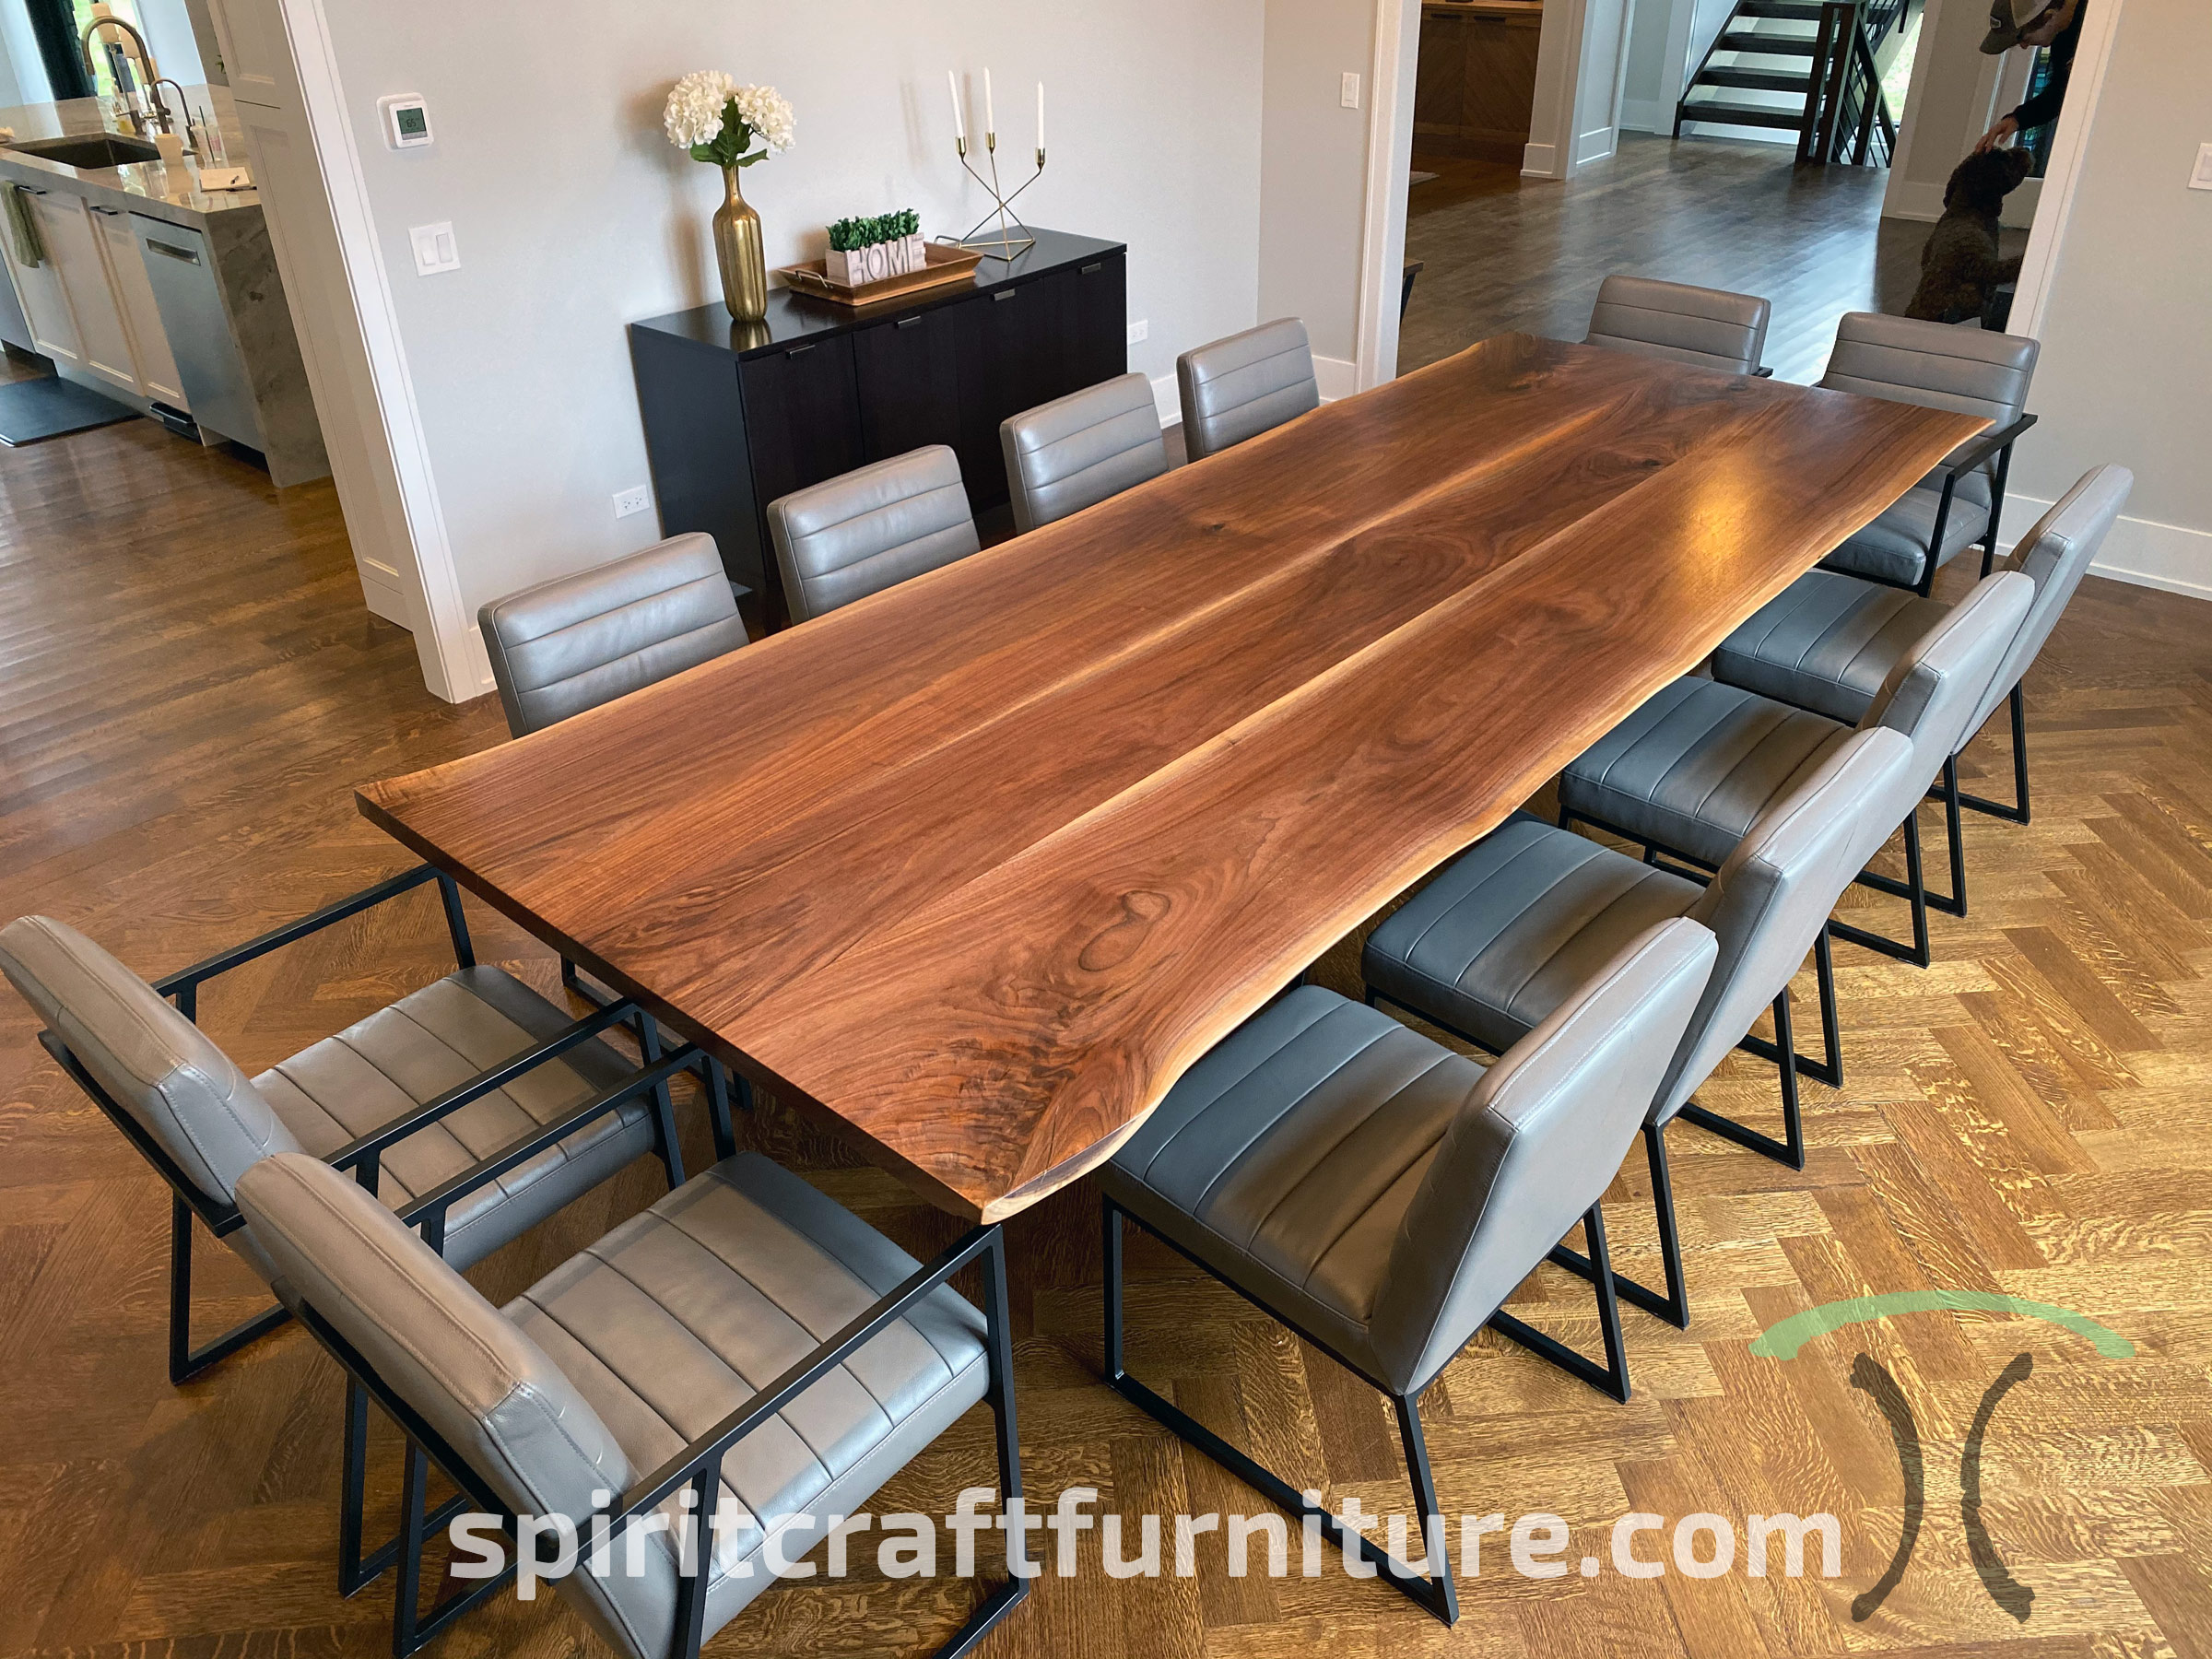 Custom Solid Wood And Live Edge Dining, Dining Table Made From Hardwood Flooring